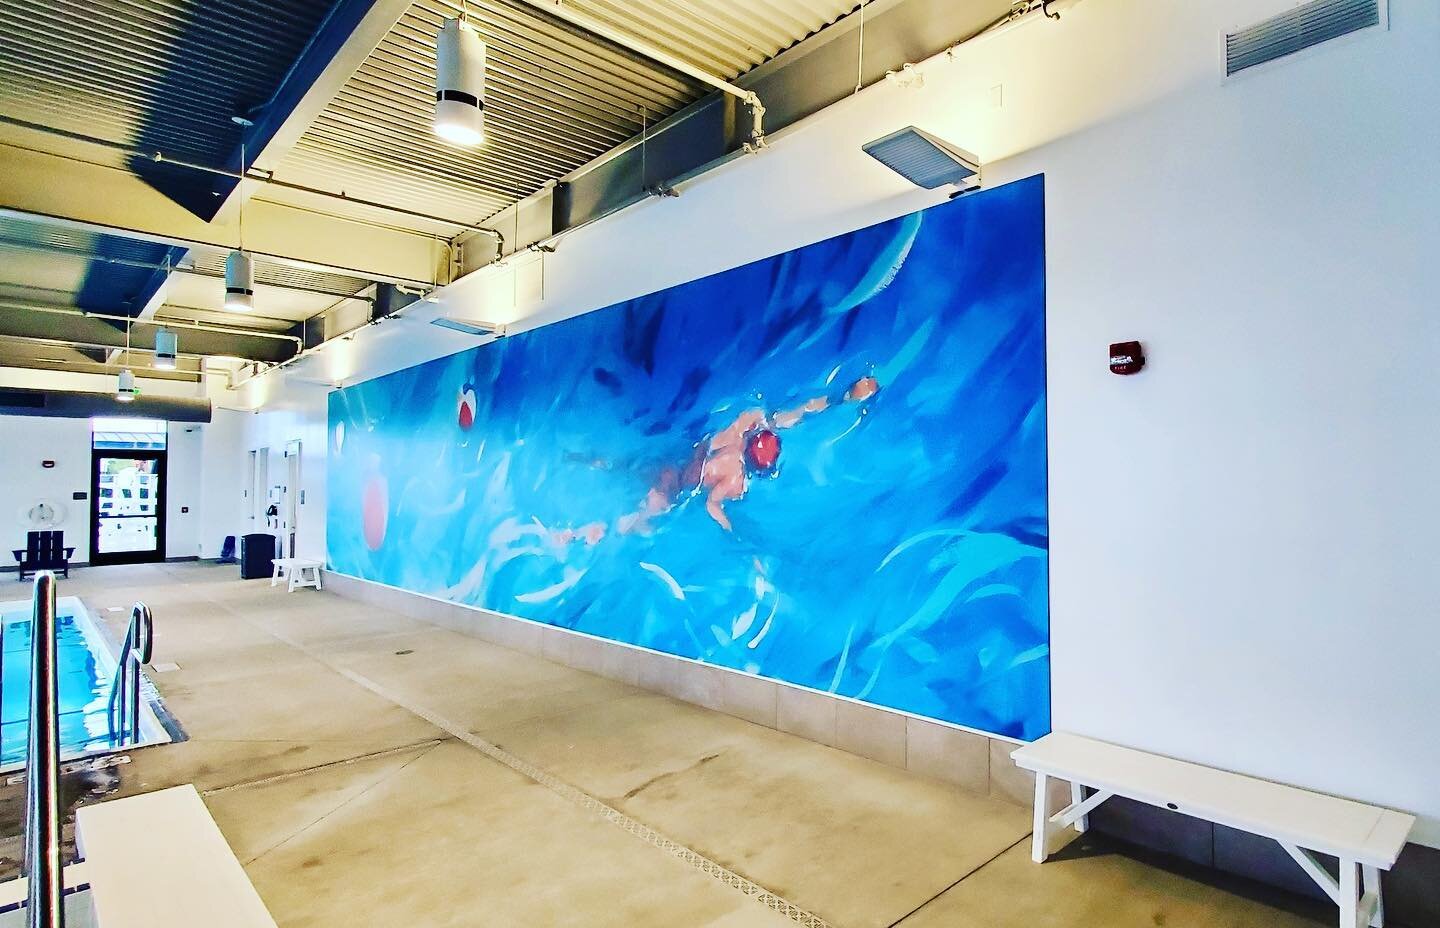 Installed 9&rsquo;6x46&rsquo; swimmer on aluminum at #activewellness #reedscrossinghillsboro